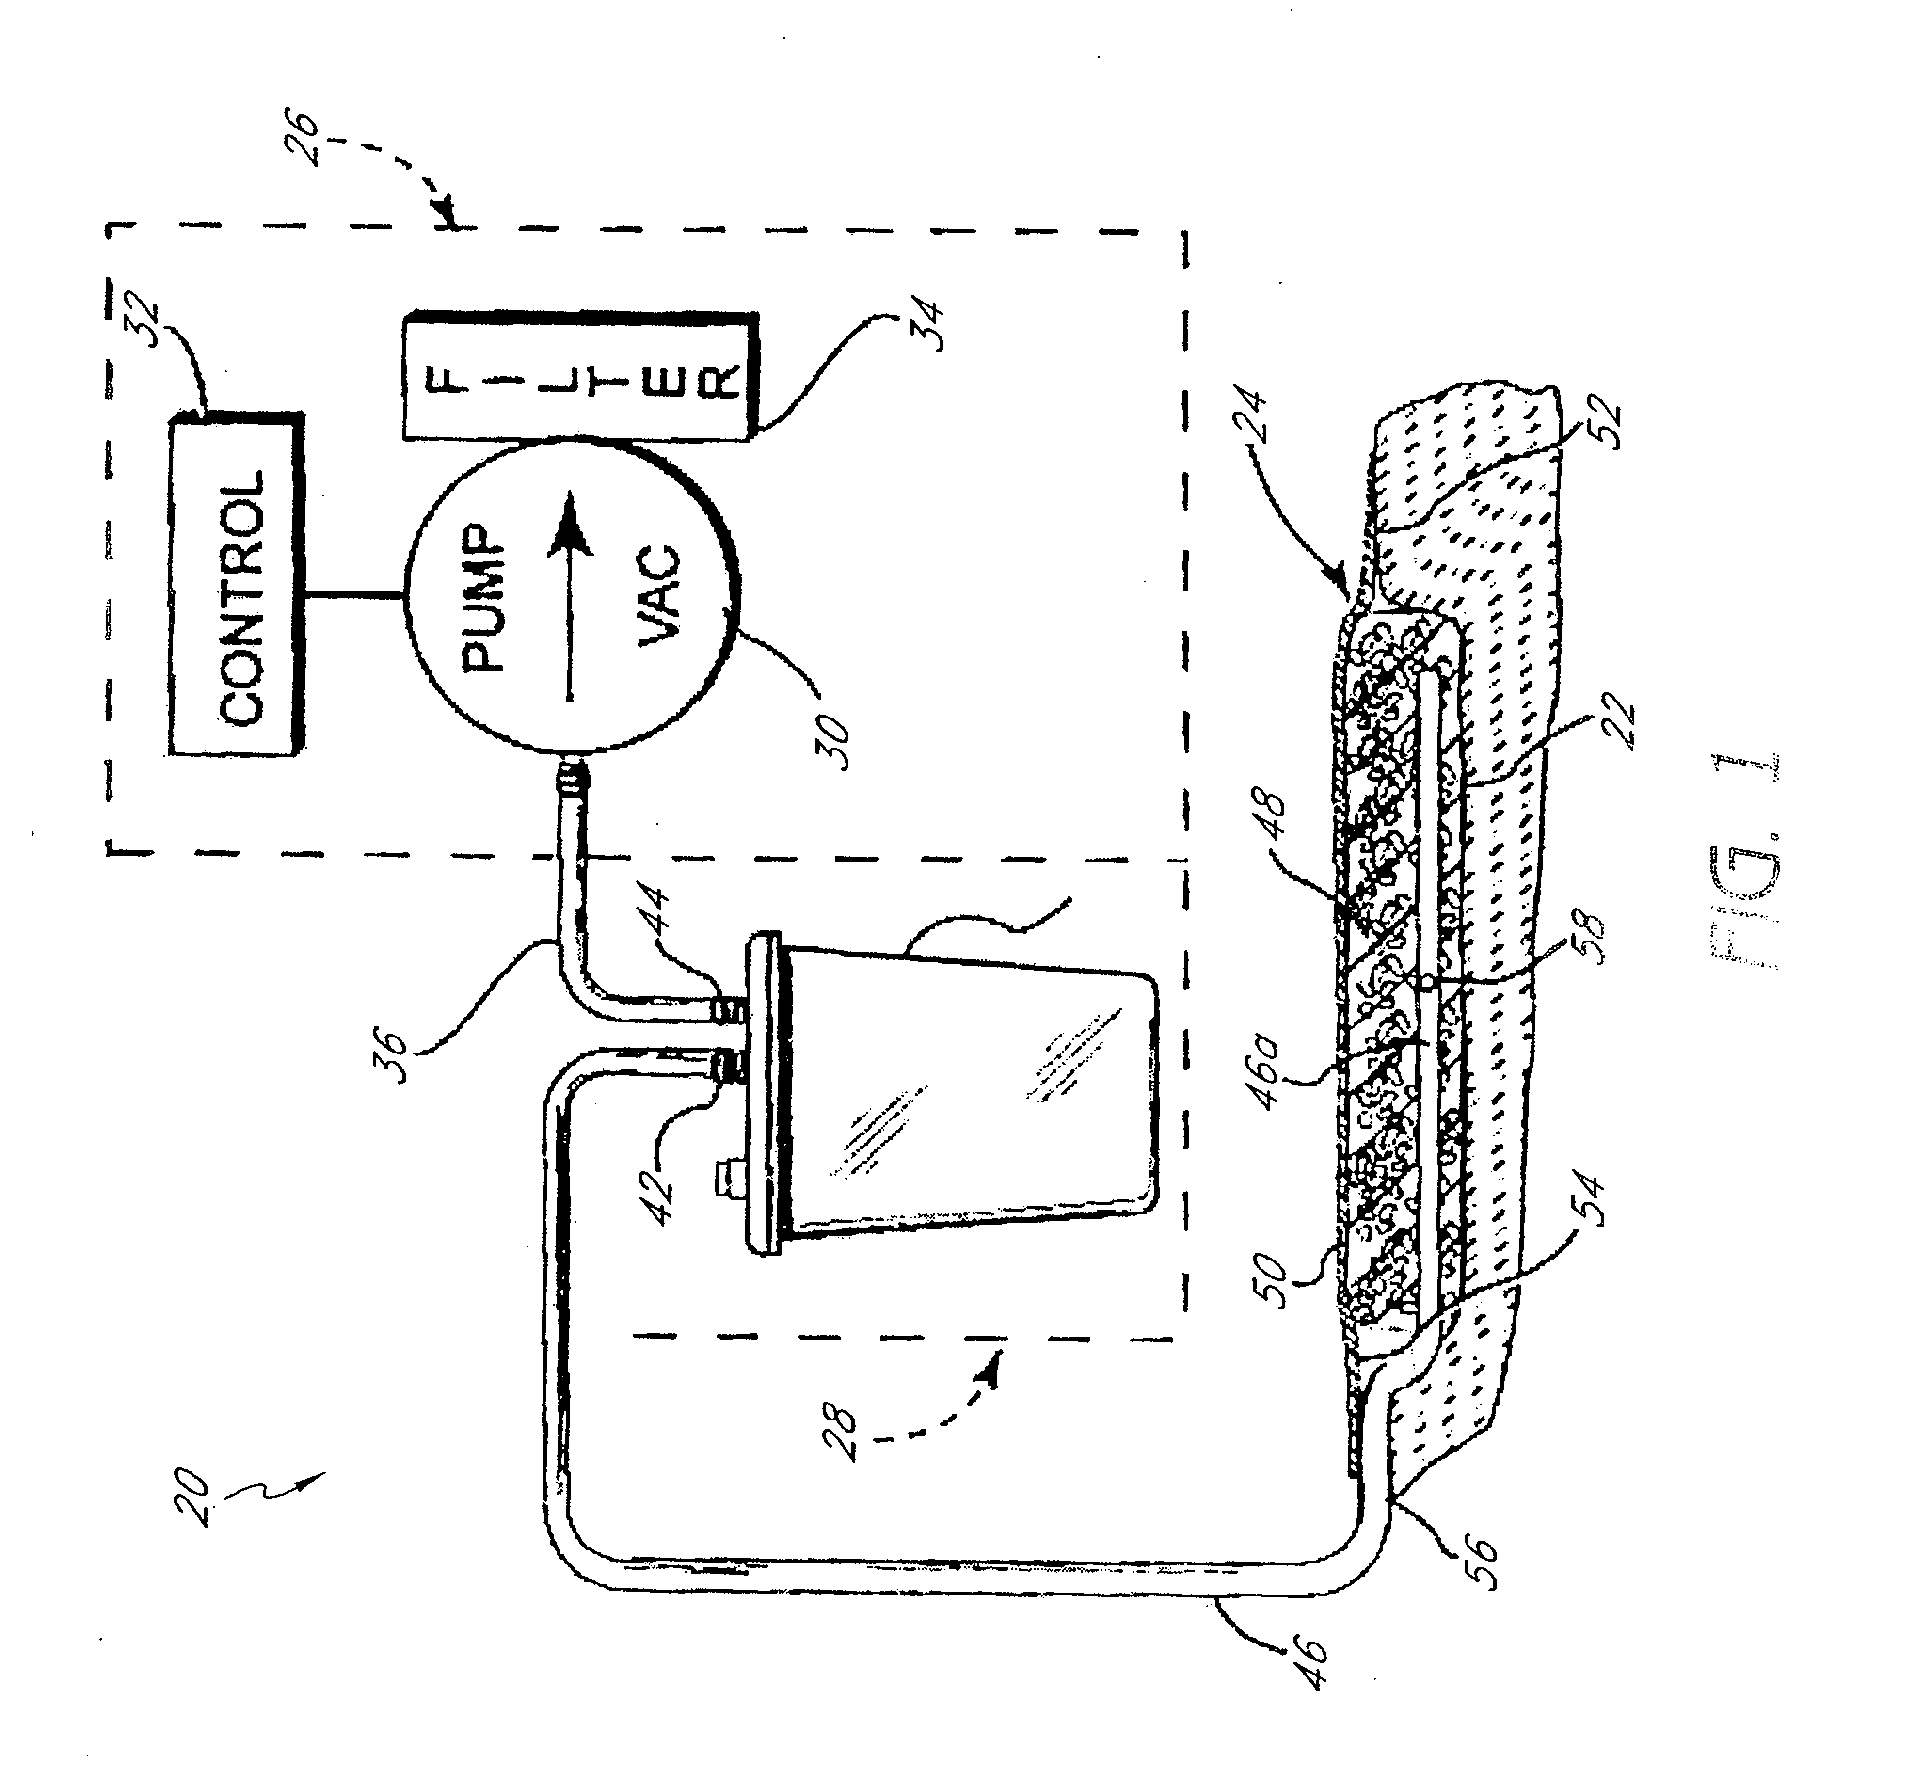 Control circuit and method for negative pressure wound treatment apparatus